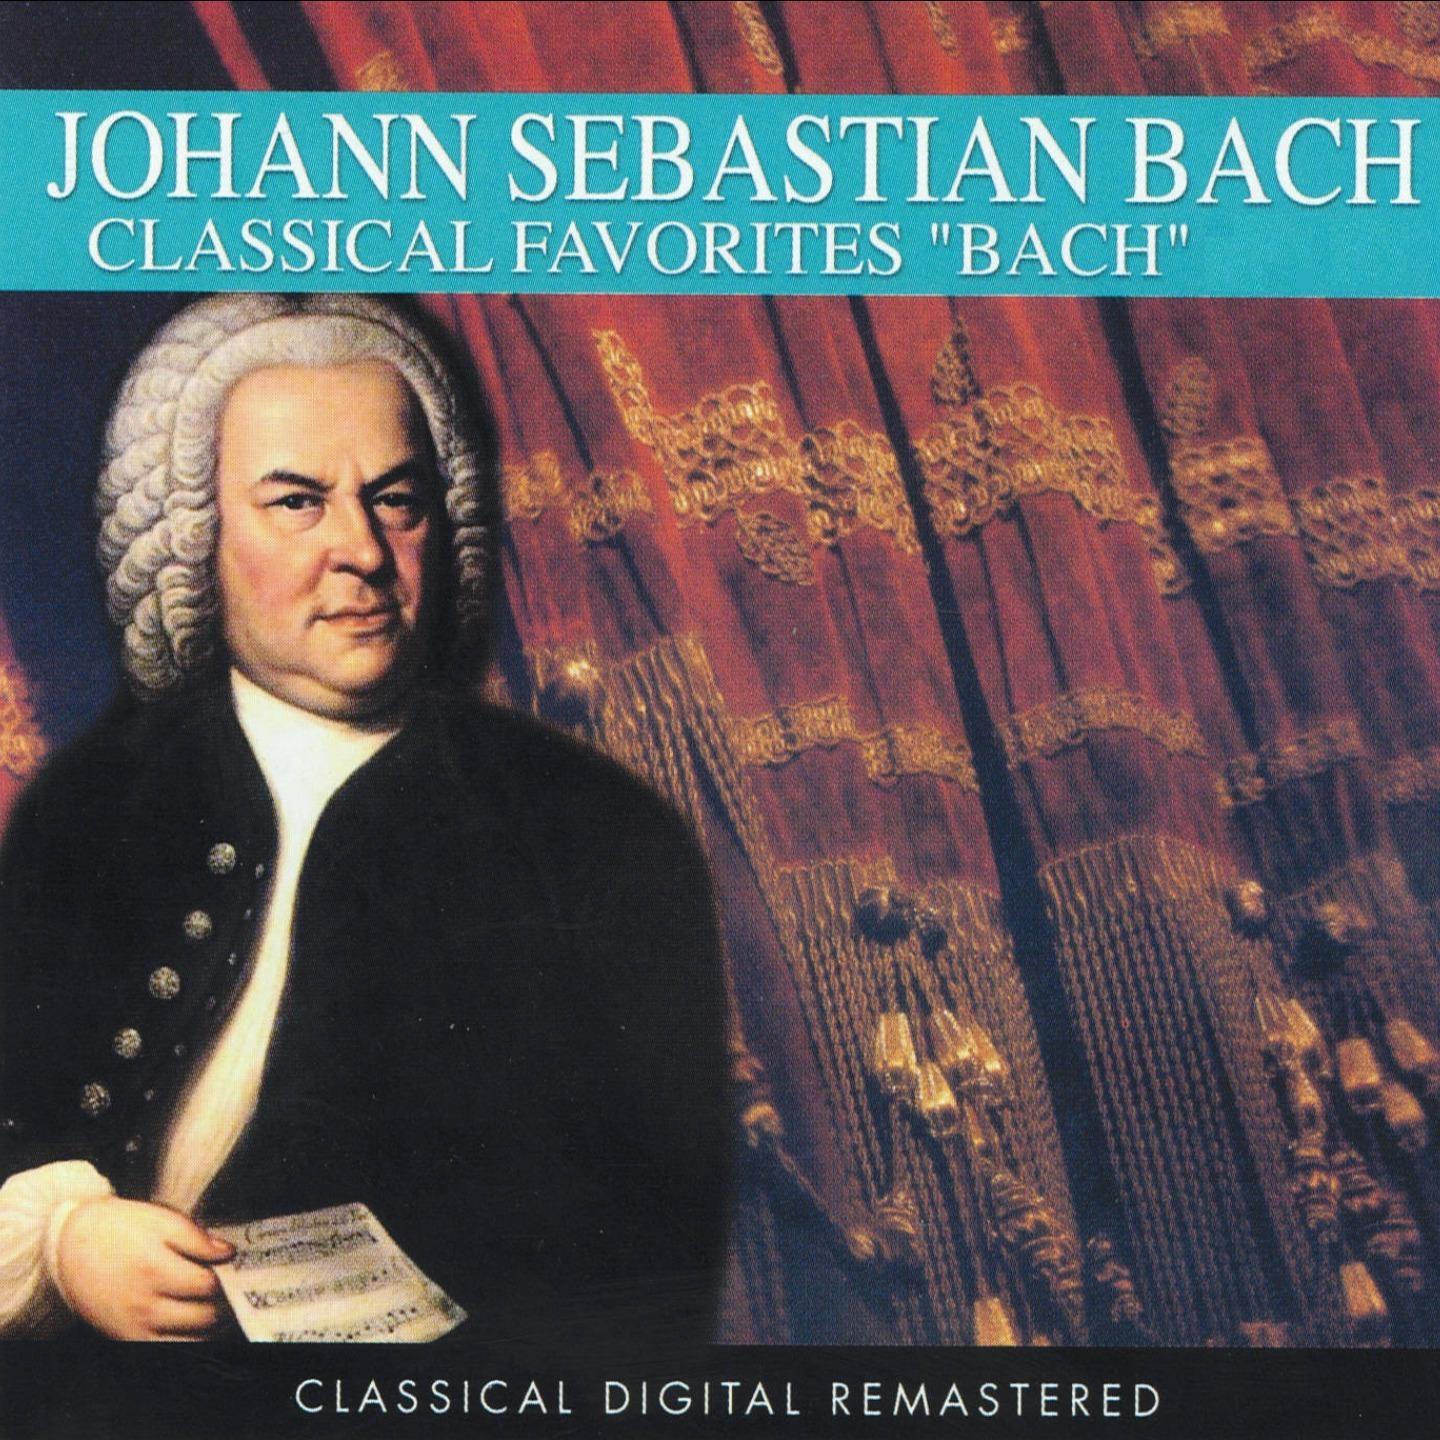 Suite for Orchestra No. 2, in B Minor, BWV 1067: Polonaise